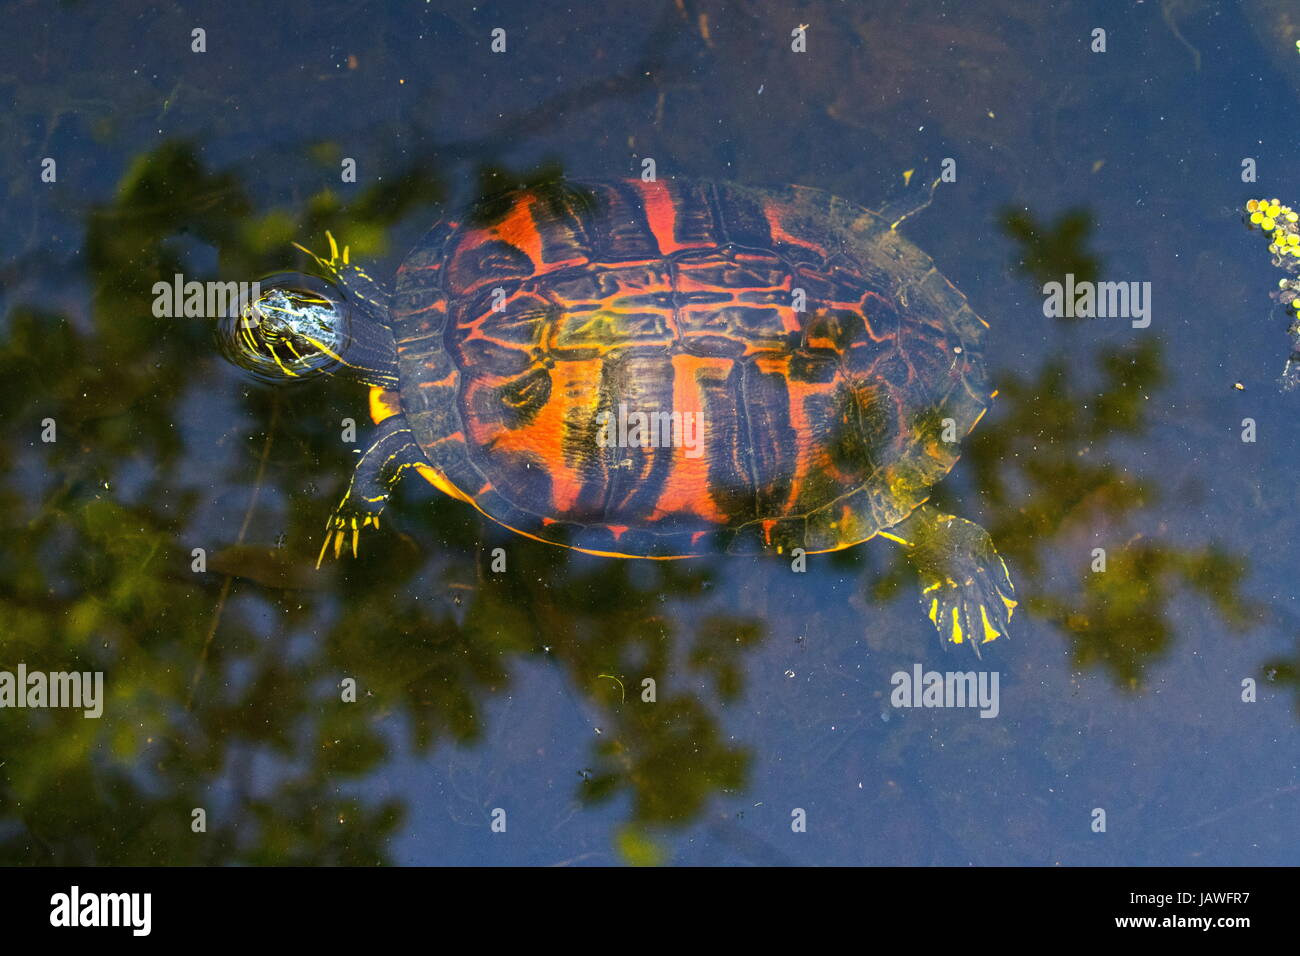 A Florida red bellied cooter, Pseudemys nelsoni, on the water's surface. Stock Photo